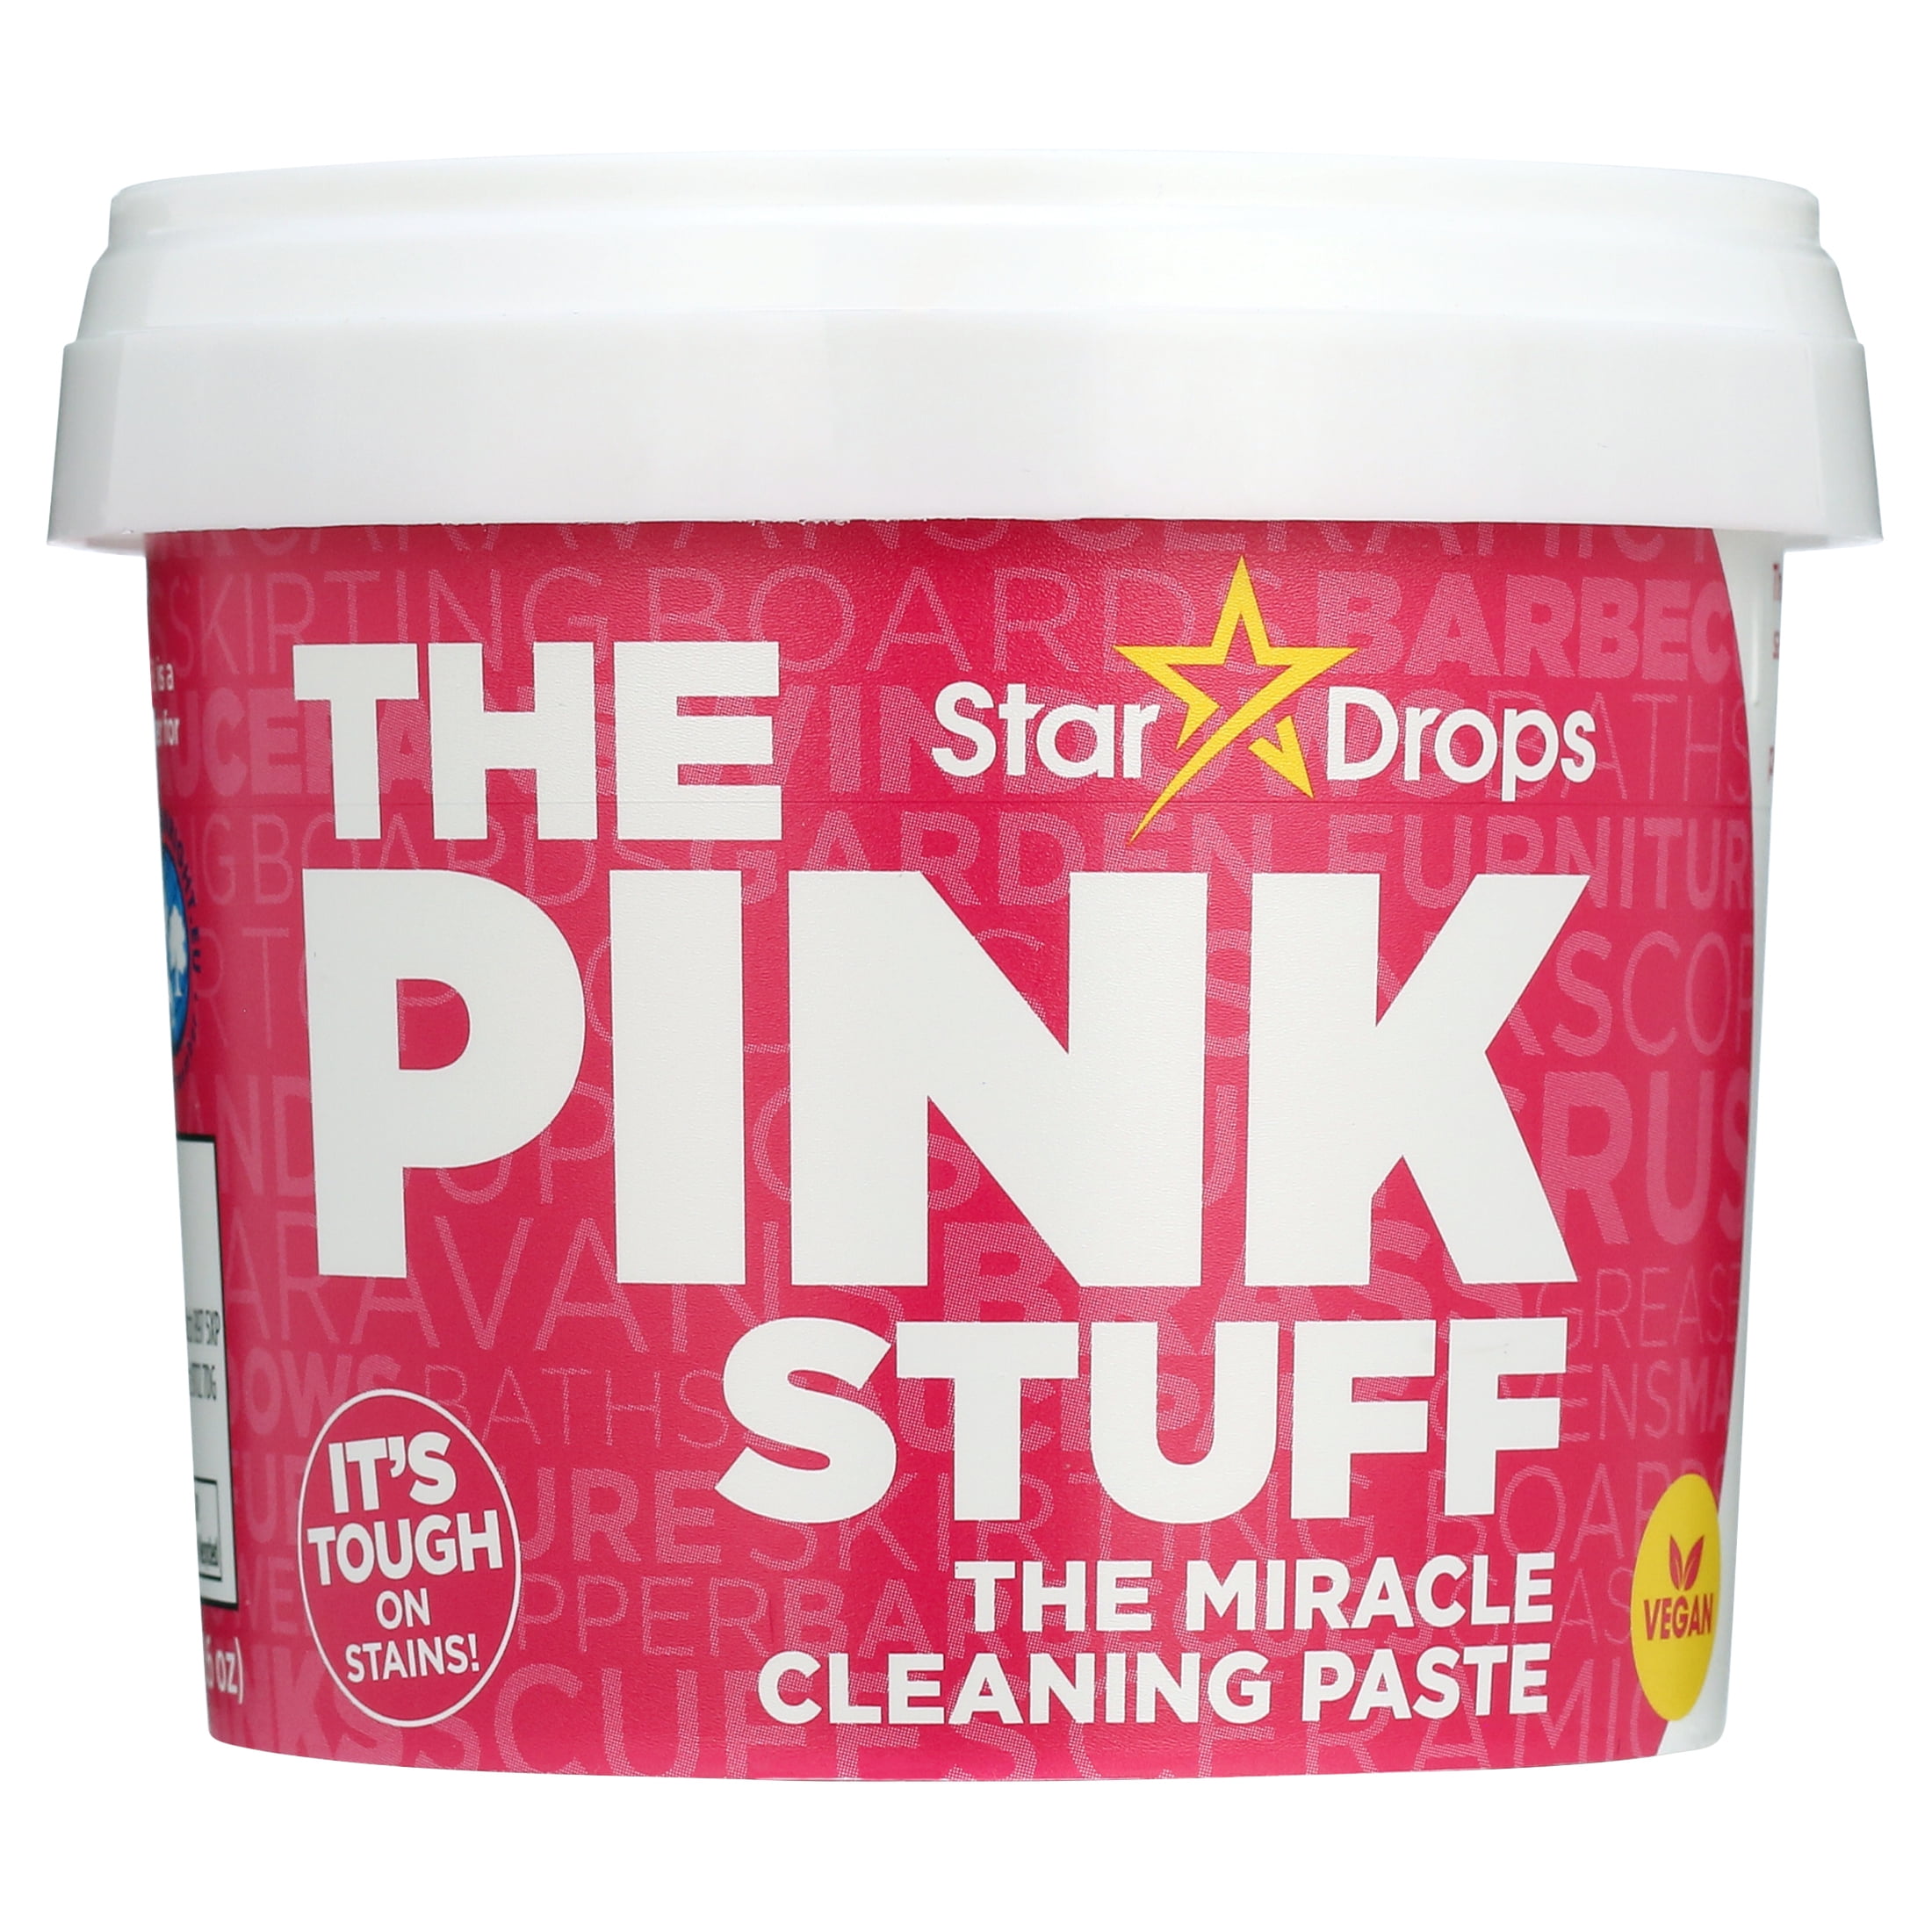 The Pink Stuff - The Miracle Cleaner